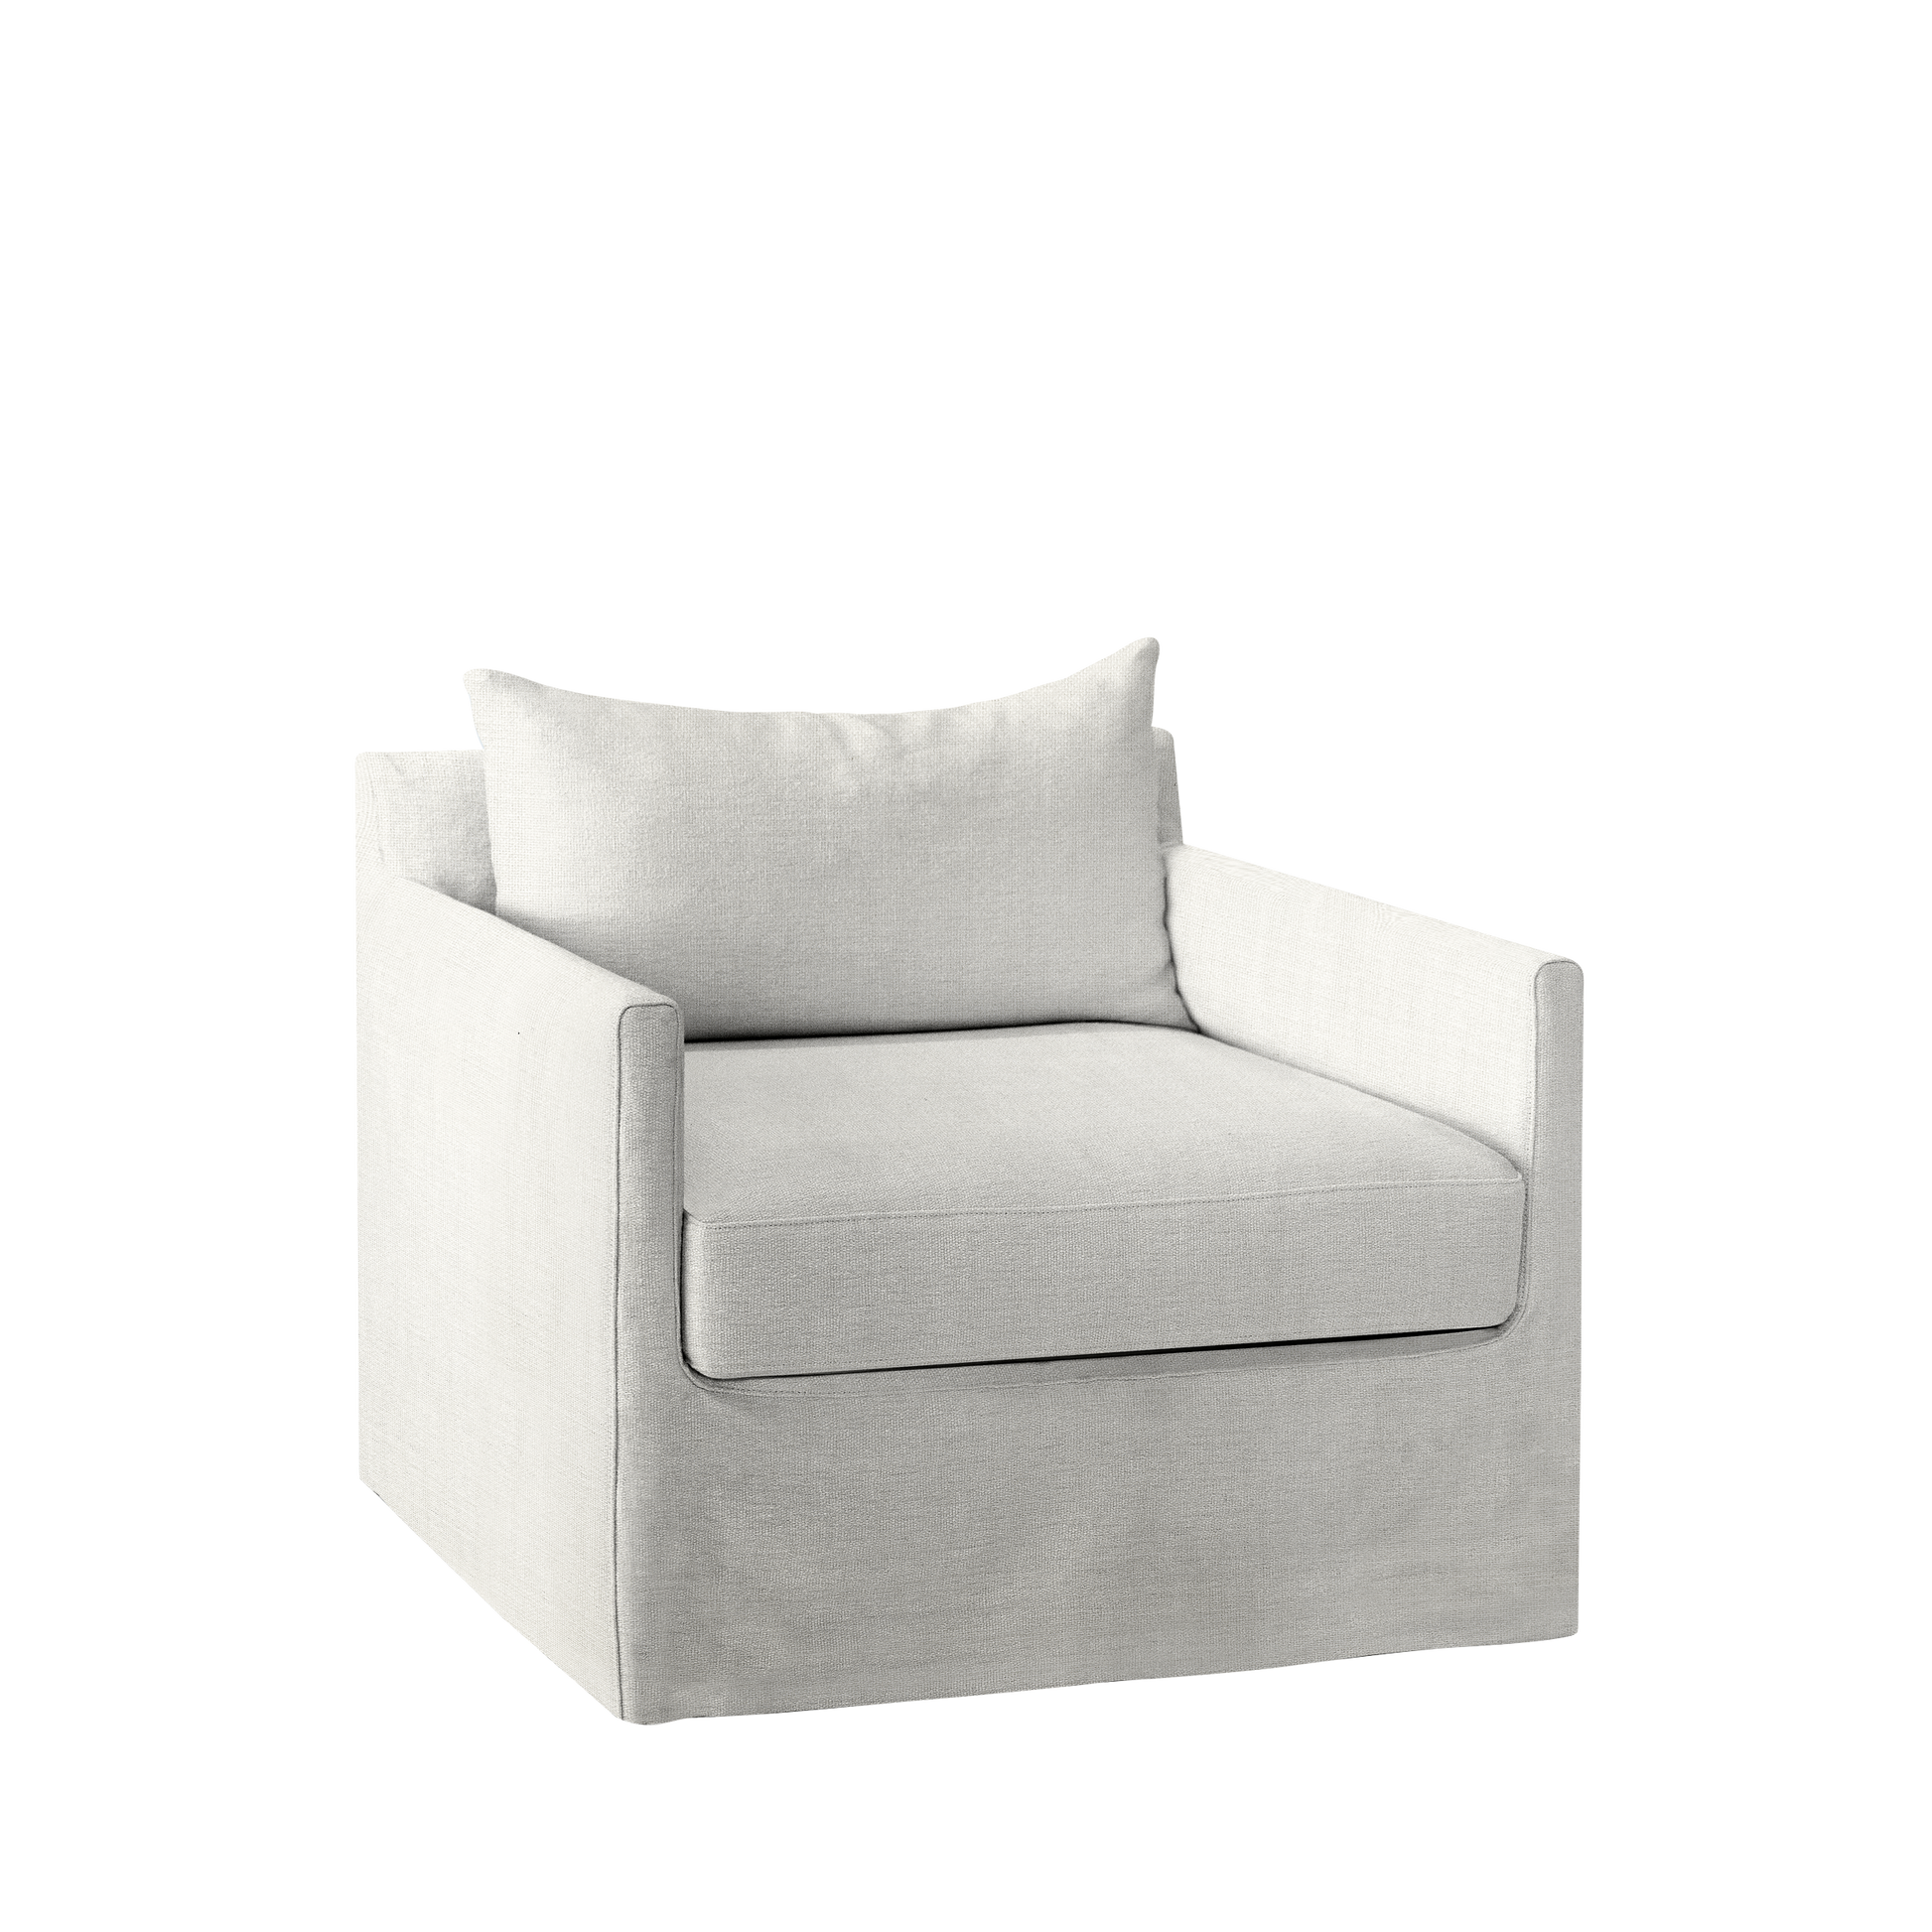 Extra wide Alba lounge chair with Rocco white textile 